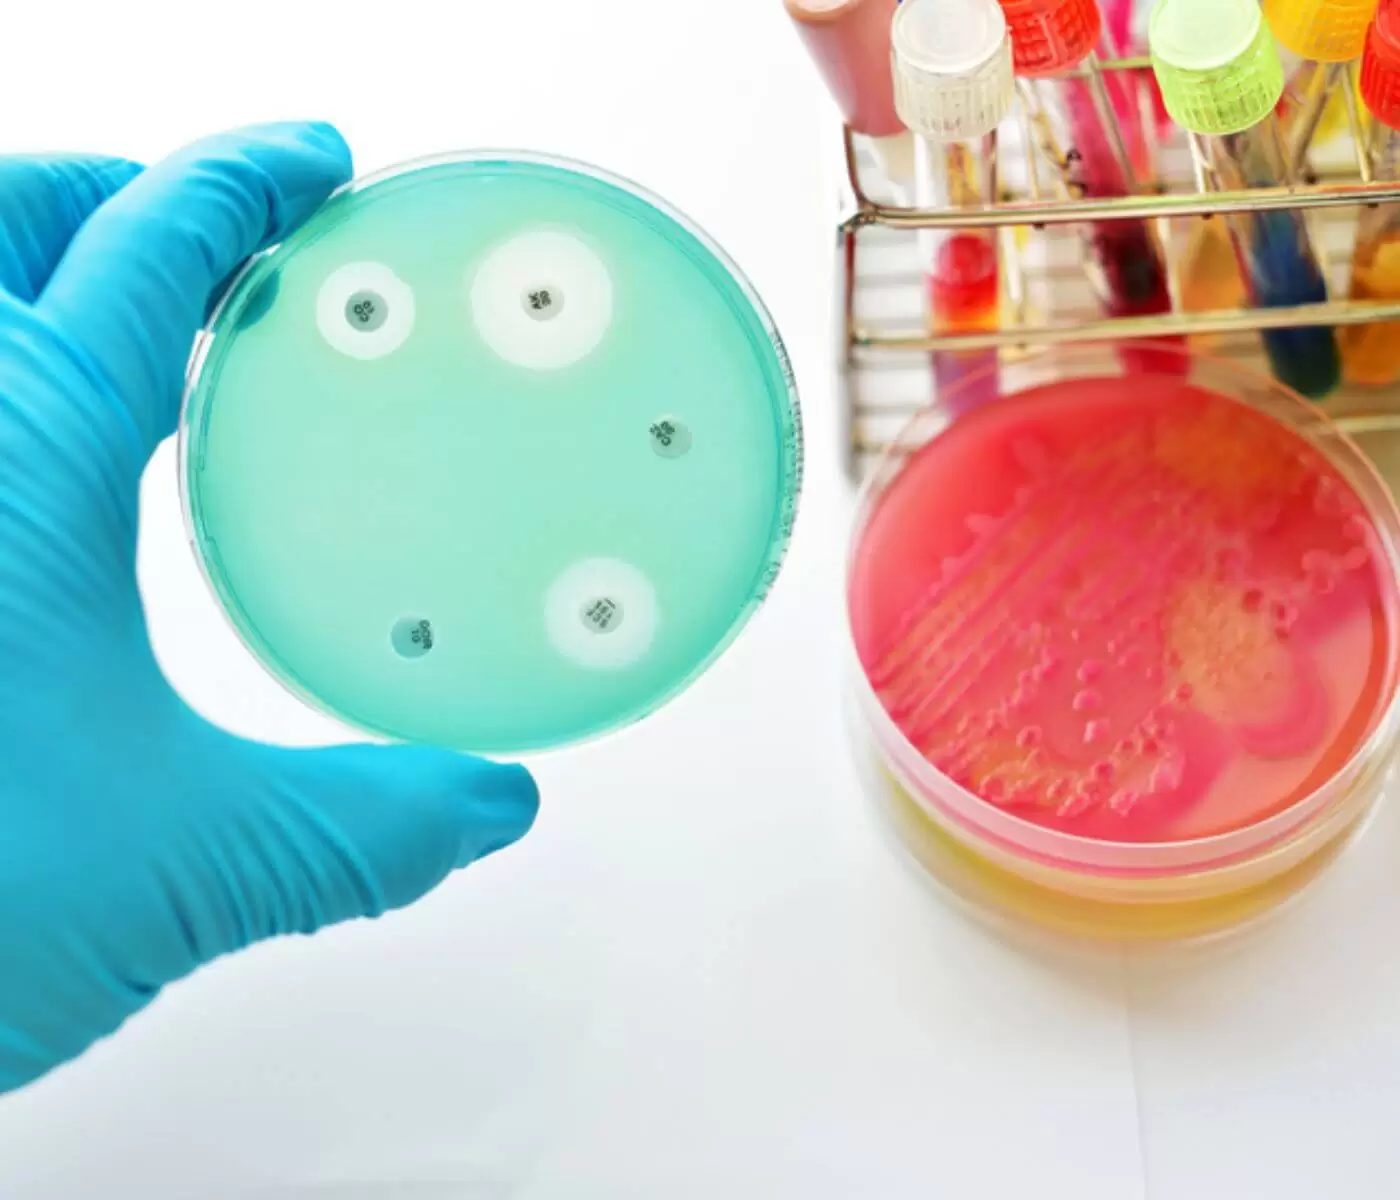 Bacterial resistance to highly used antibiotics: A worrying trend!